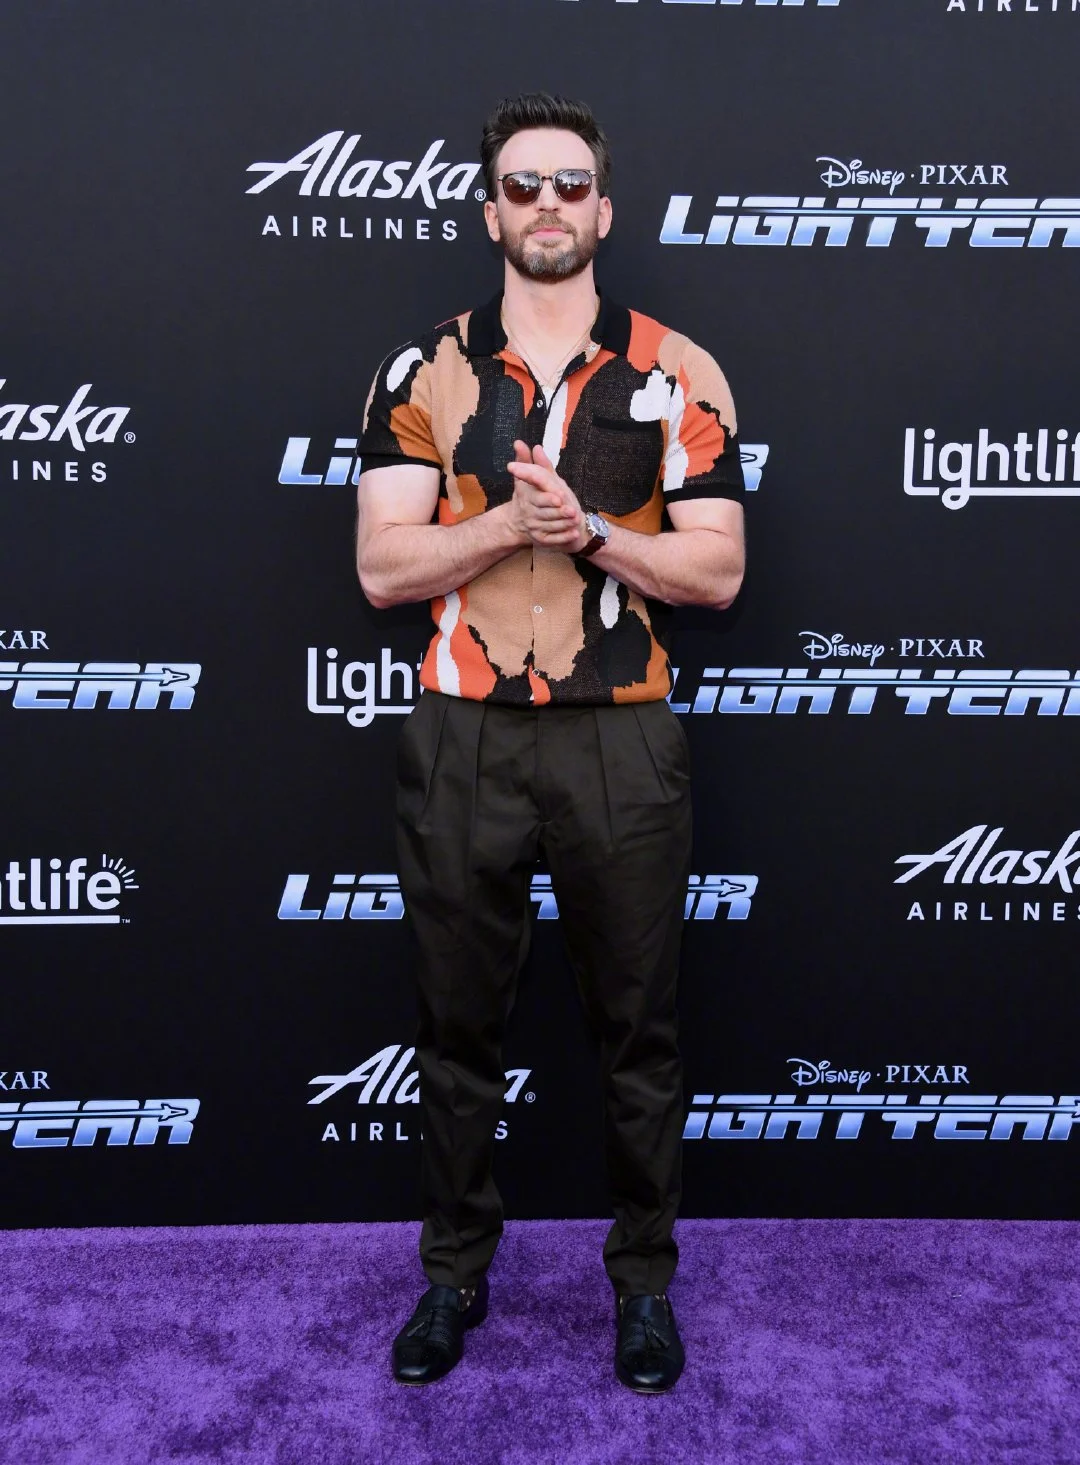 Chris Evans at the world premiere of his new Pixar film "Lightyear"